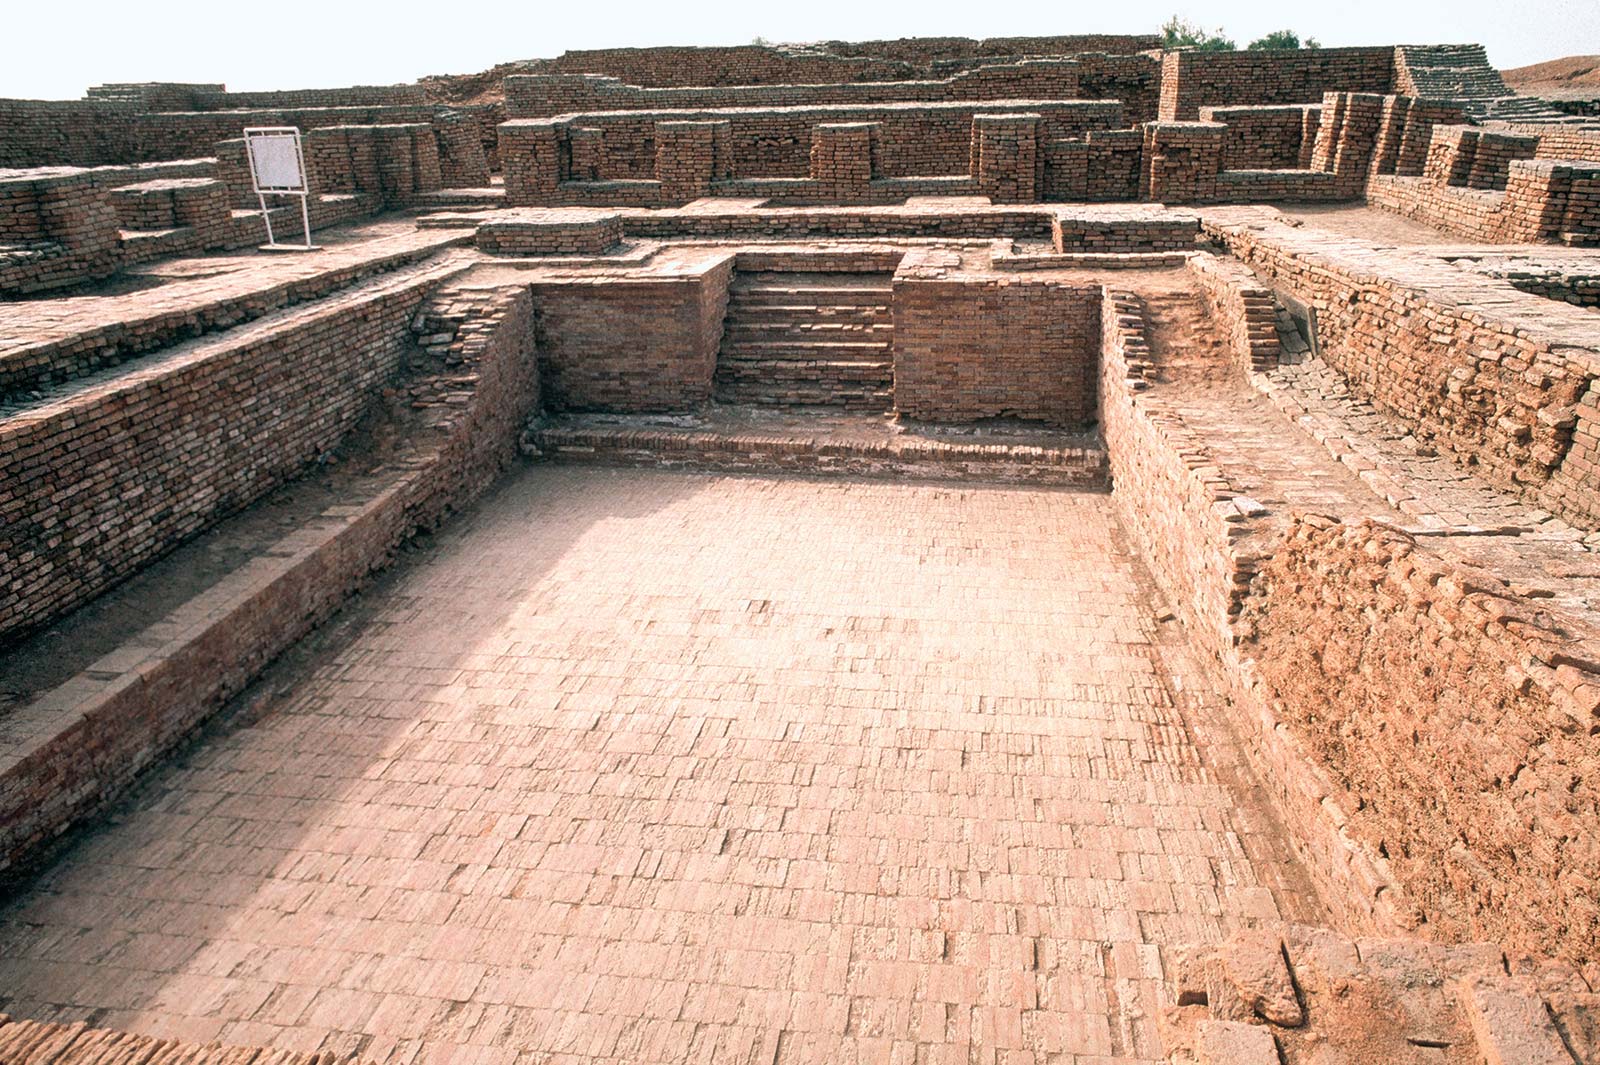 essay on a visit to a historical place mohenjo daro